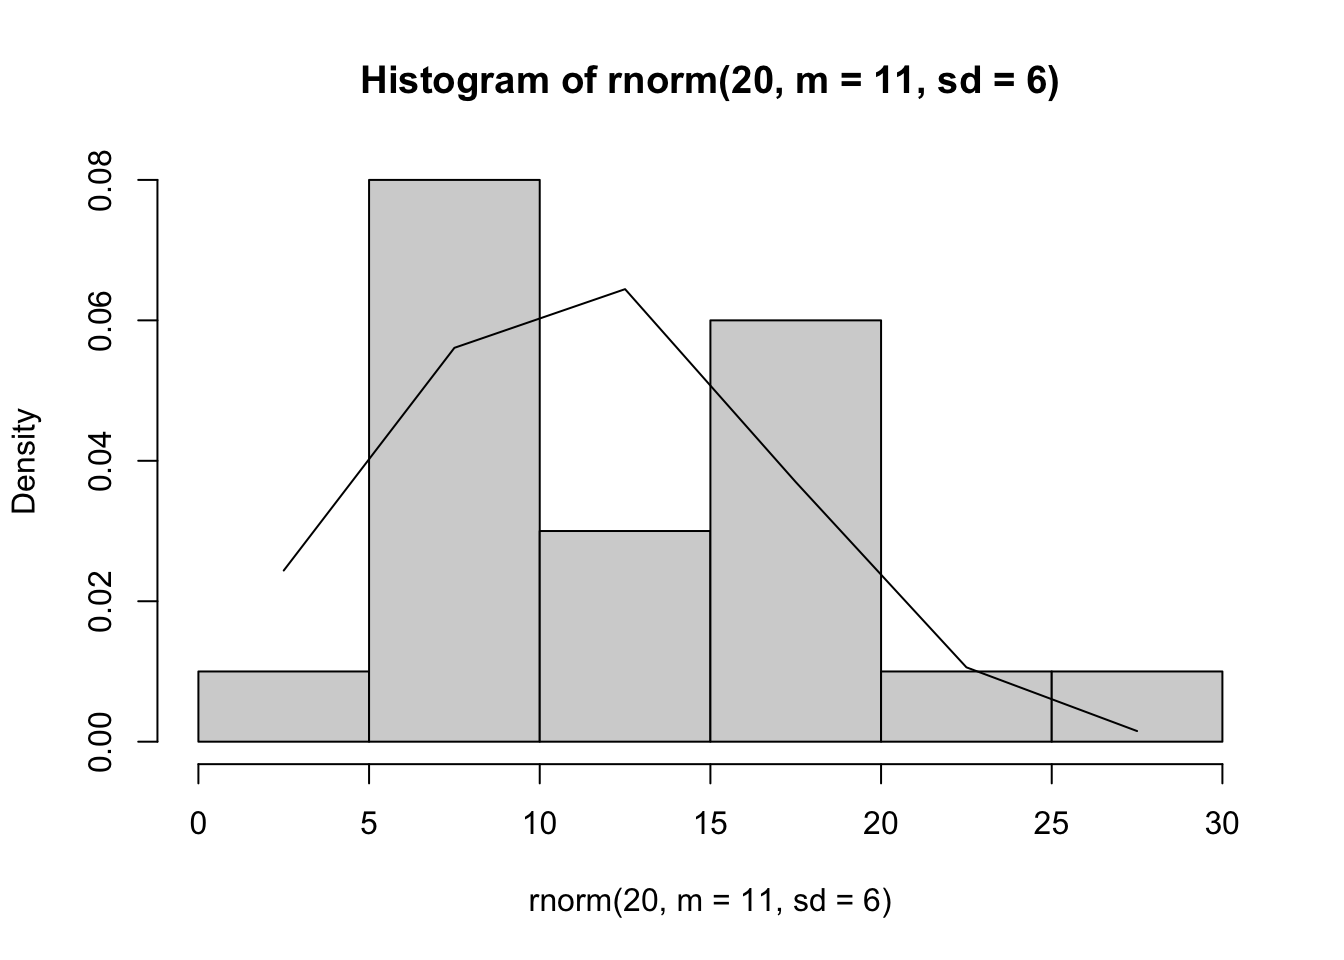 *Histogram of random numbers drawn from a normal distribution with $\mu=11$ and $\sigma=6$. The normal probability density function is drawn as well.*